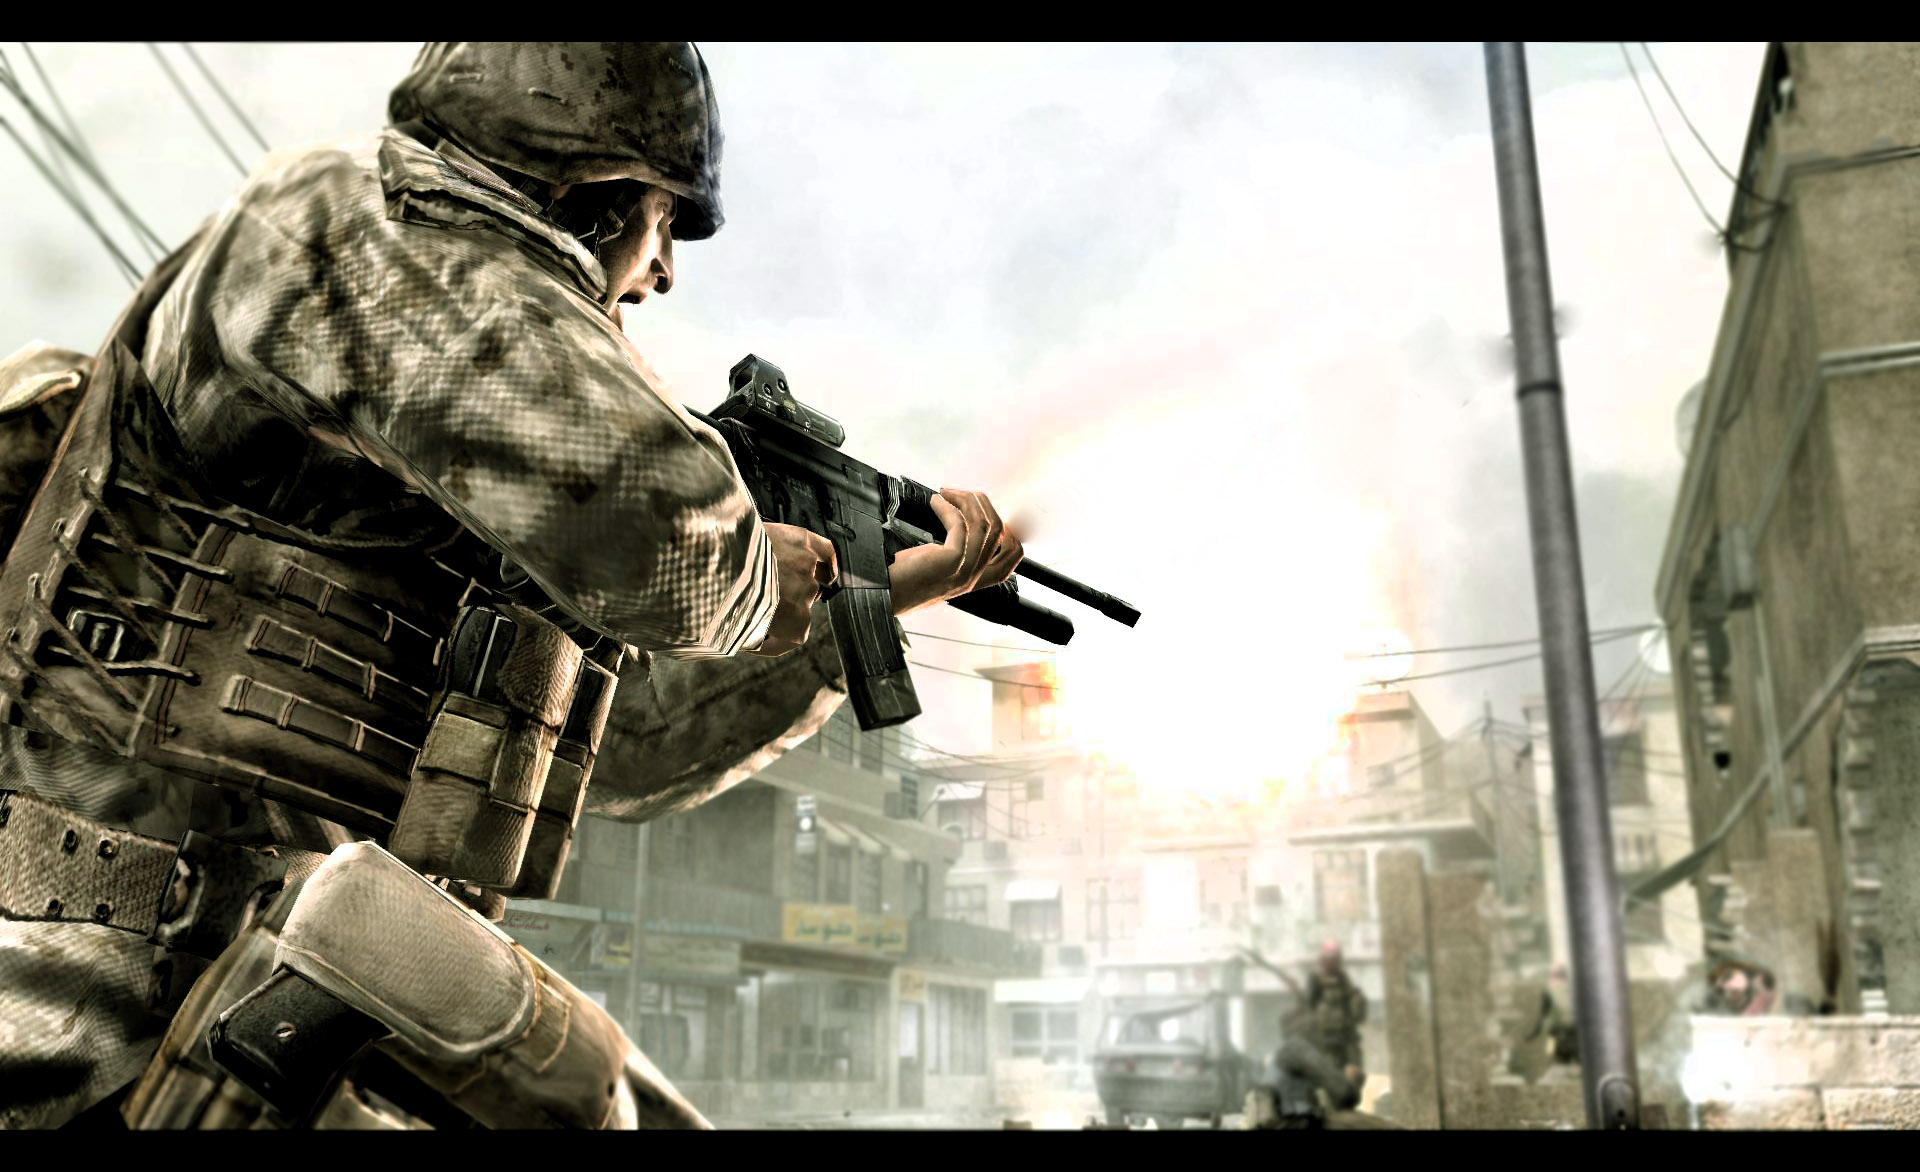 Wallpapers Of The Day: COD 4 Modern Warfare | 1920x1080 COD 4 ...